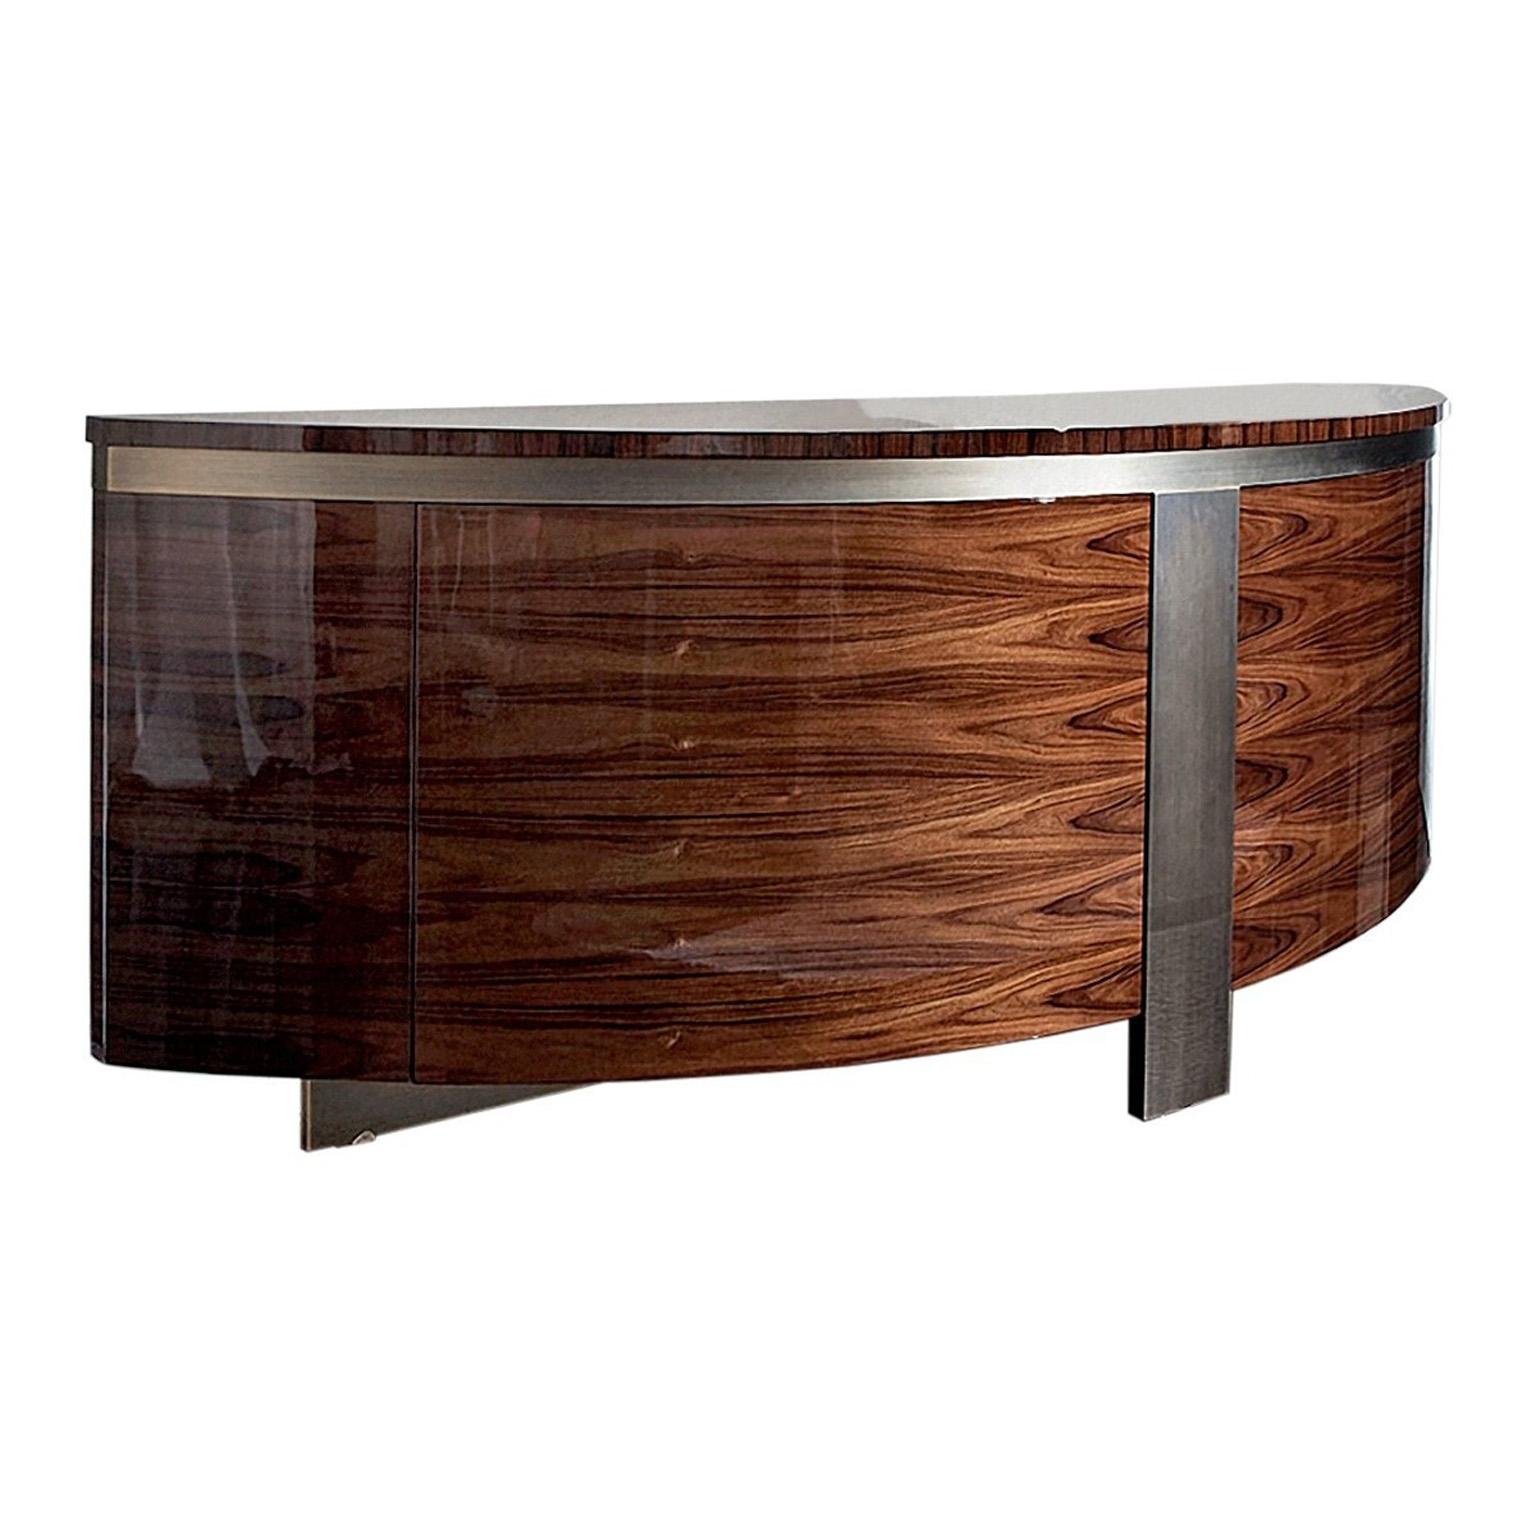 'Giorgio Collection' Brazilian Rosewood Curve High Gloss Buffet Sideboard For Sale